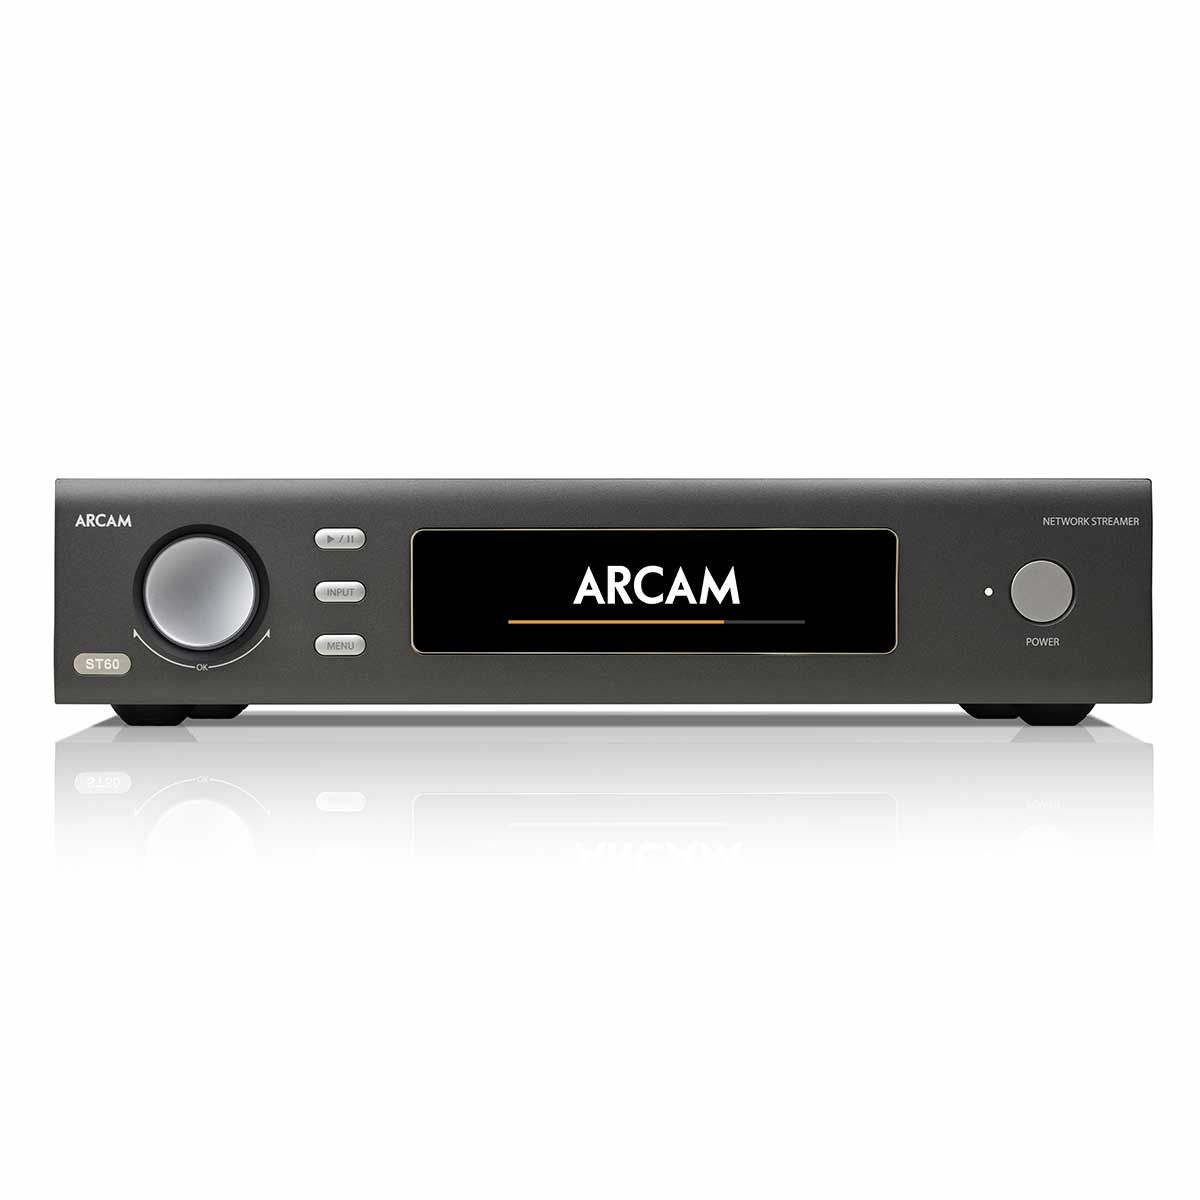 Arcam ST60 Streamer, Black, front view without antennae